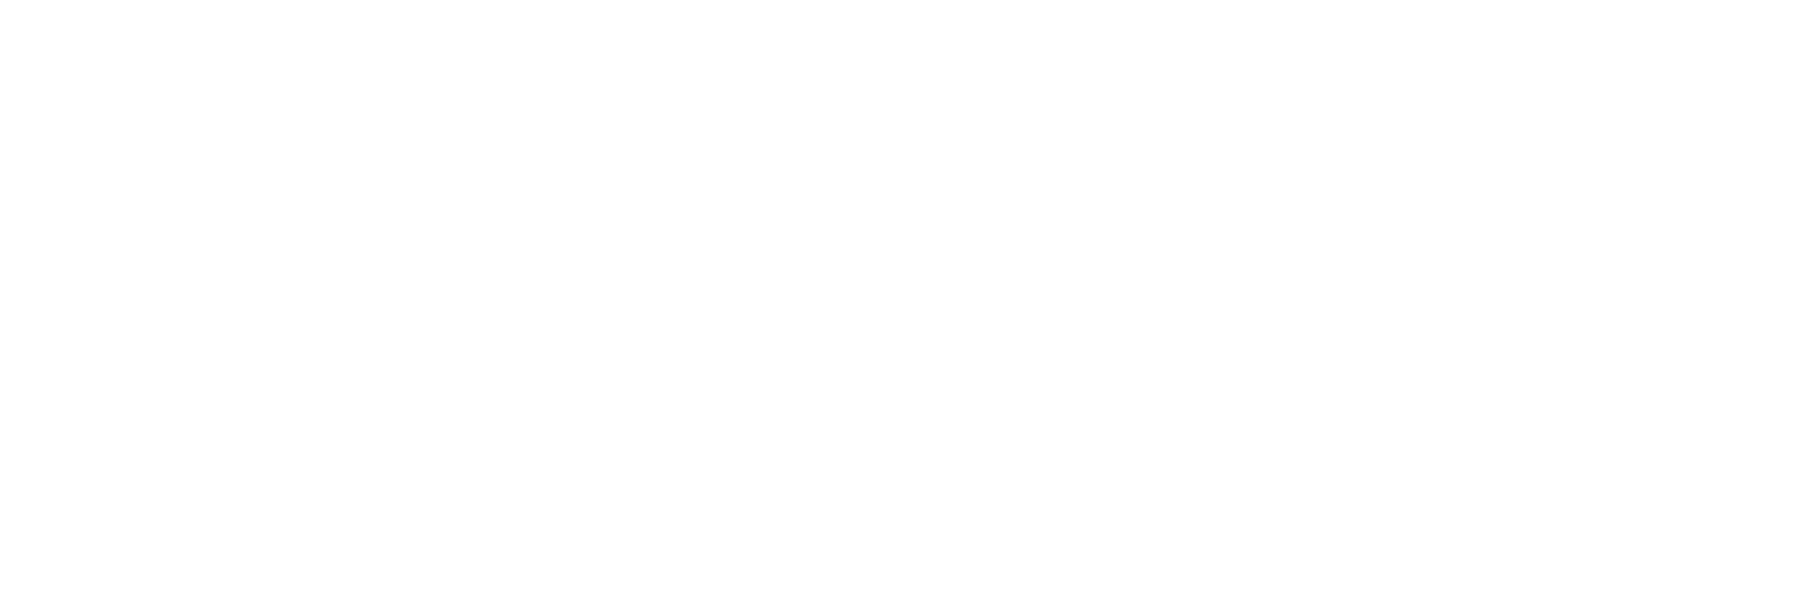 USA - Red Rooster Golf Inc.